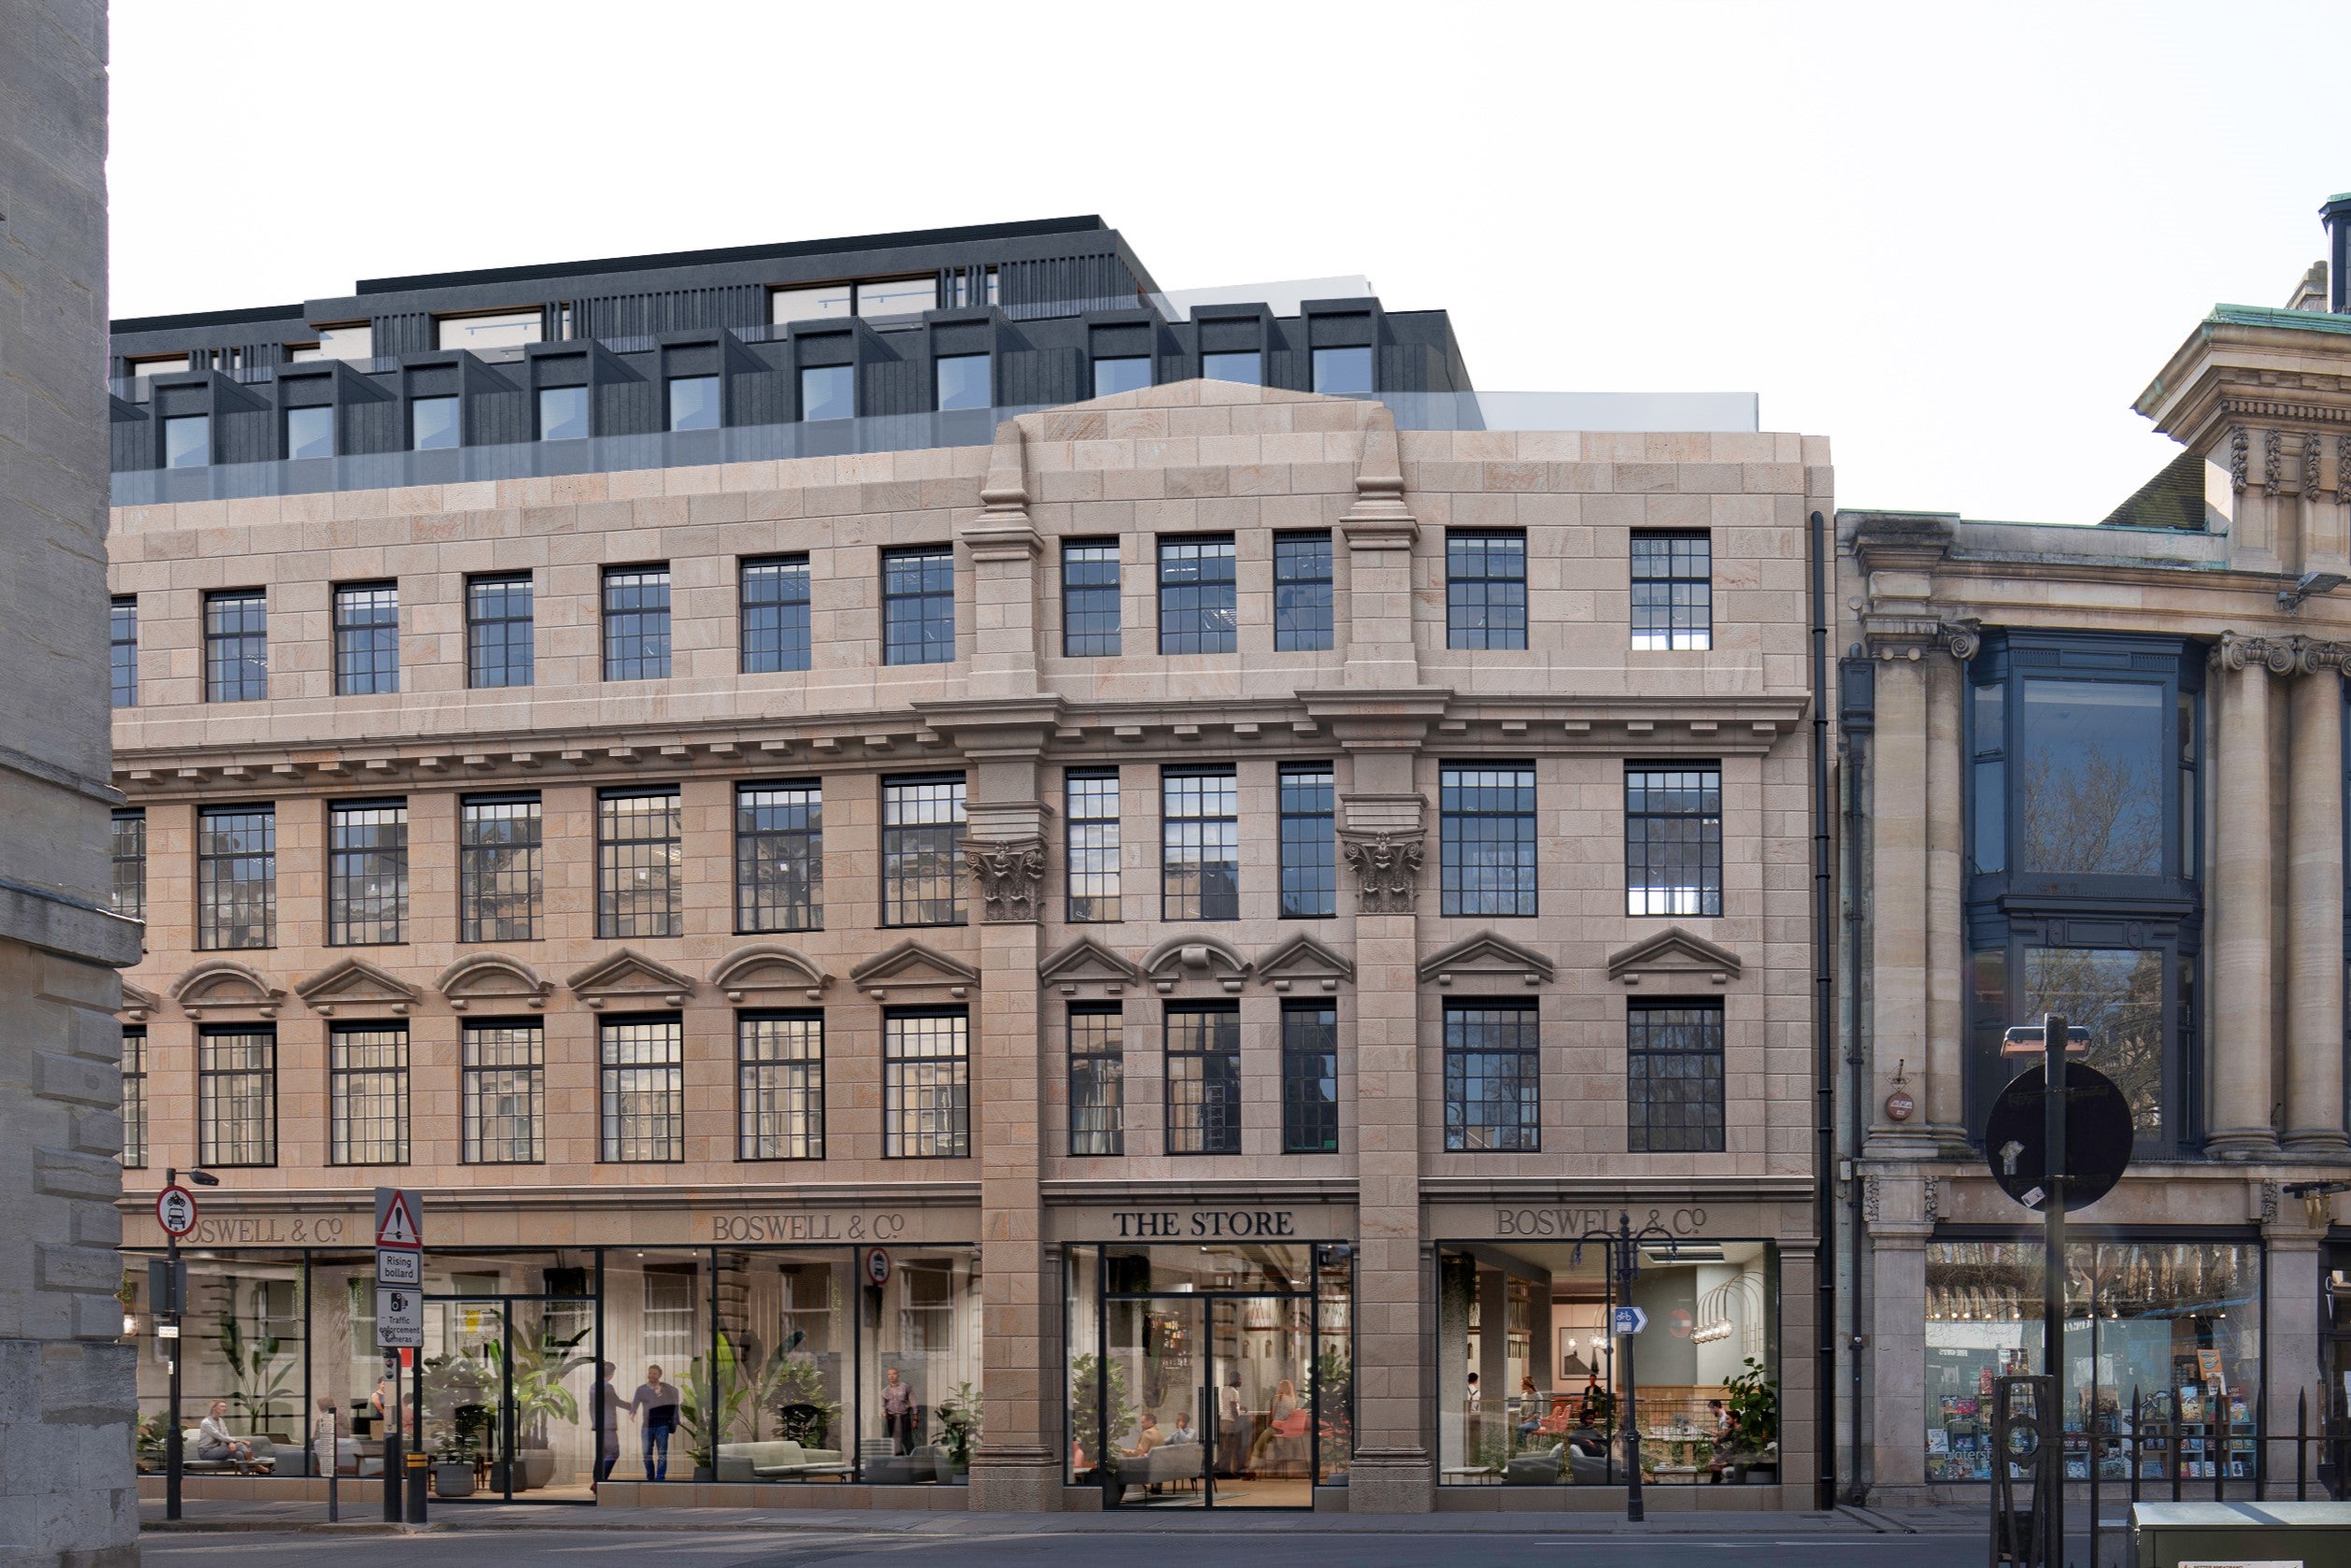 A historic department store is being transformed into The Store hotel